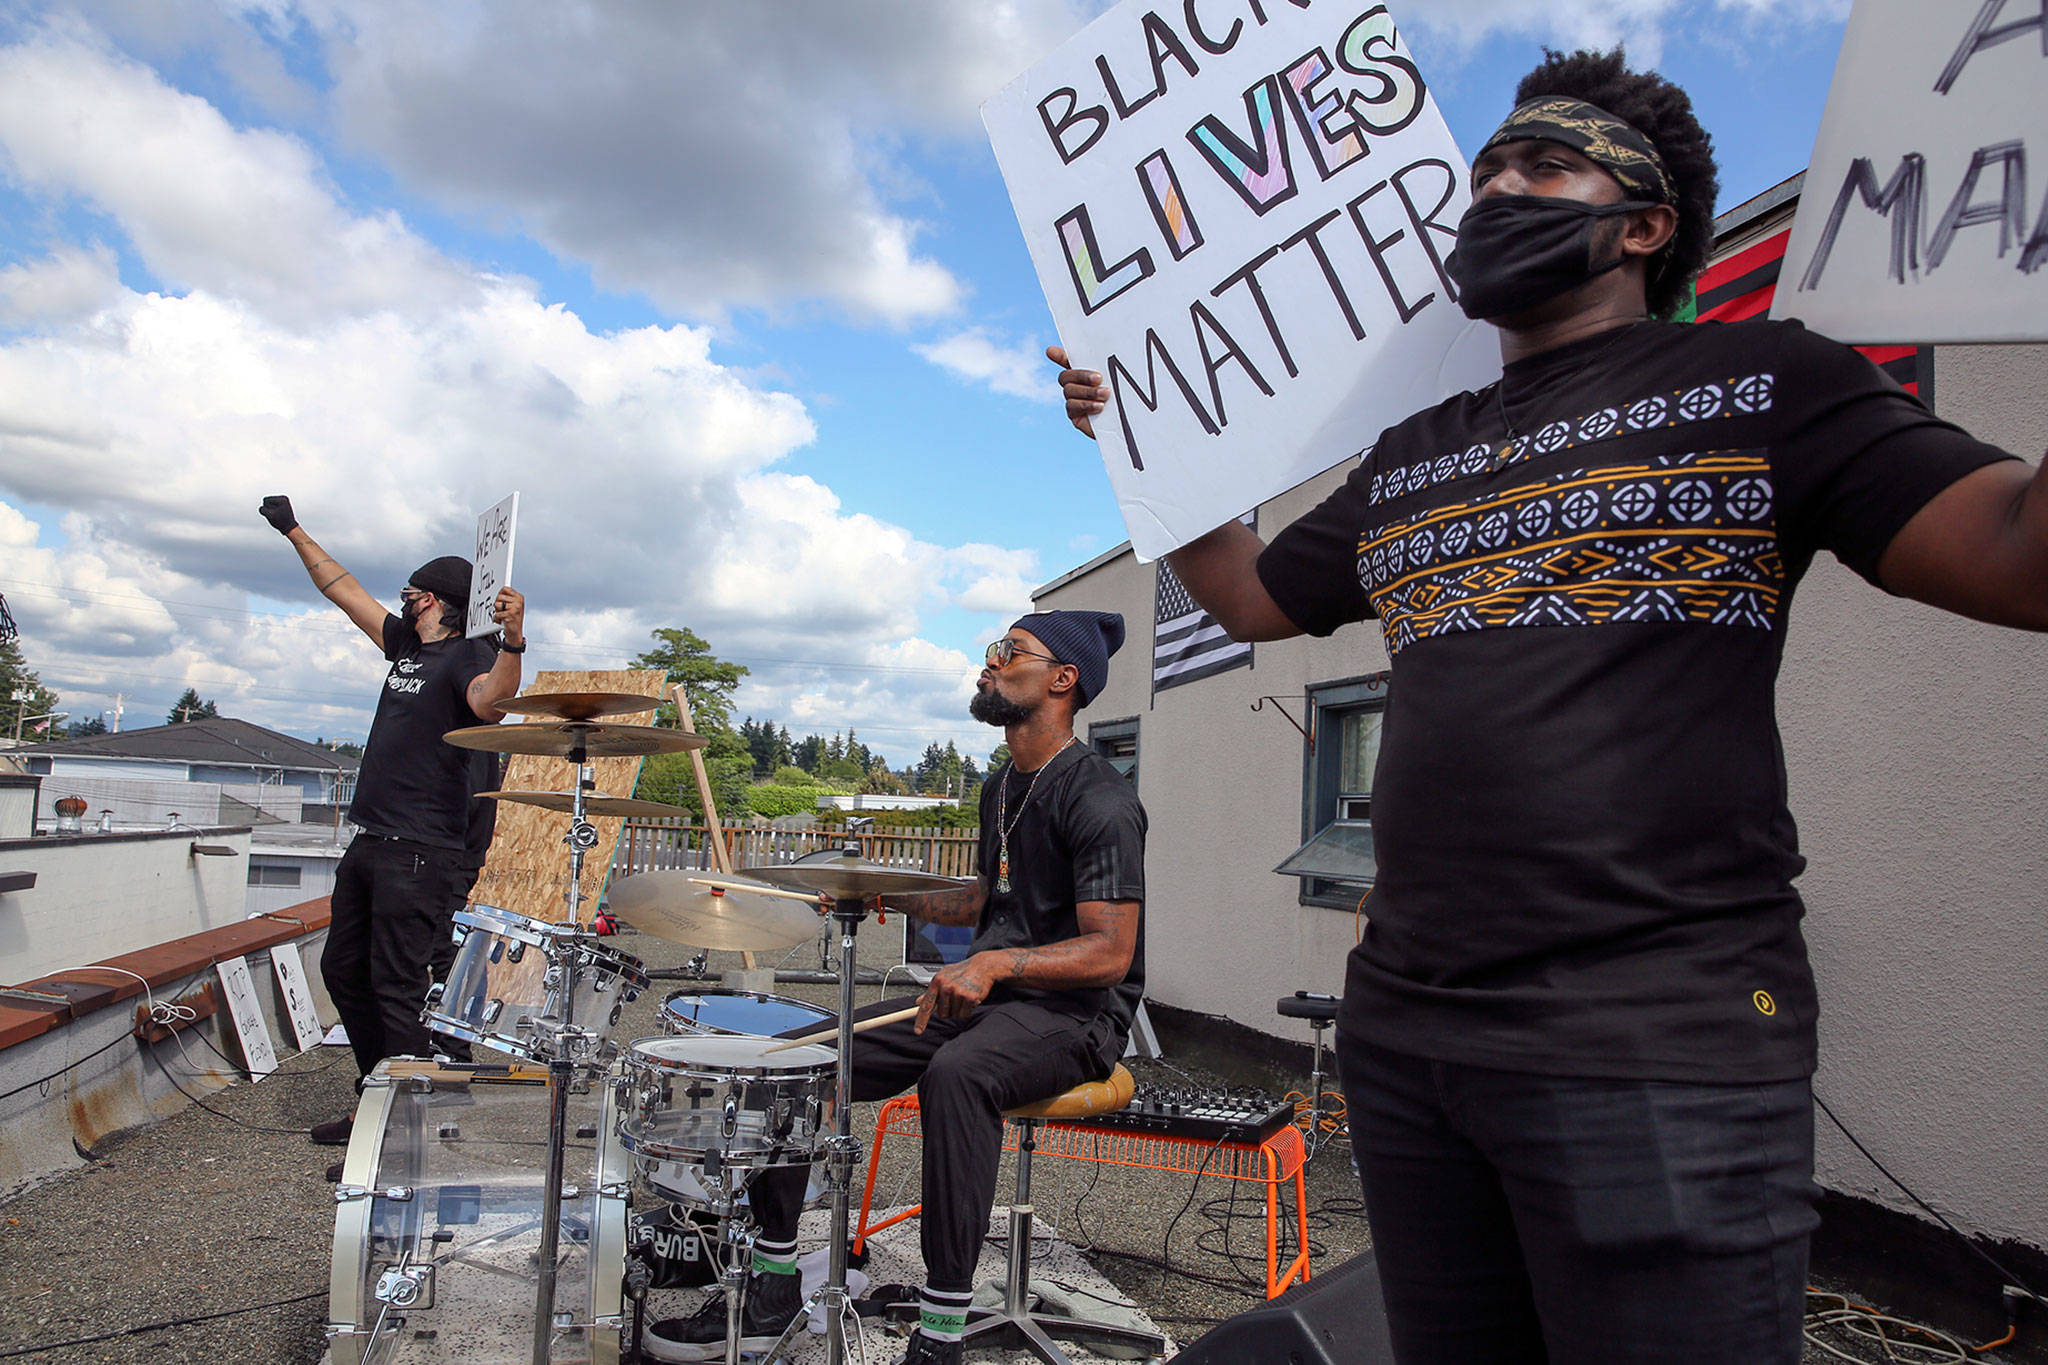 Jordon Jeffries (left), Chris Anderson (center) and Xavier Bennett rally on a rooftop for Black Lives Matter on July 4 in Marysville. (Kevin Clark / The Herald)